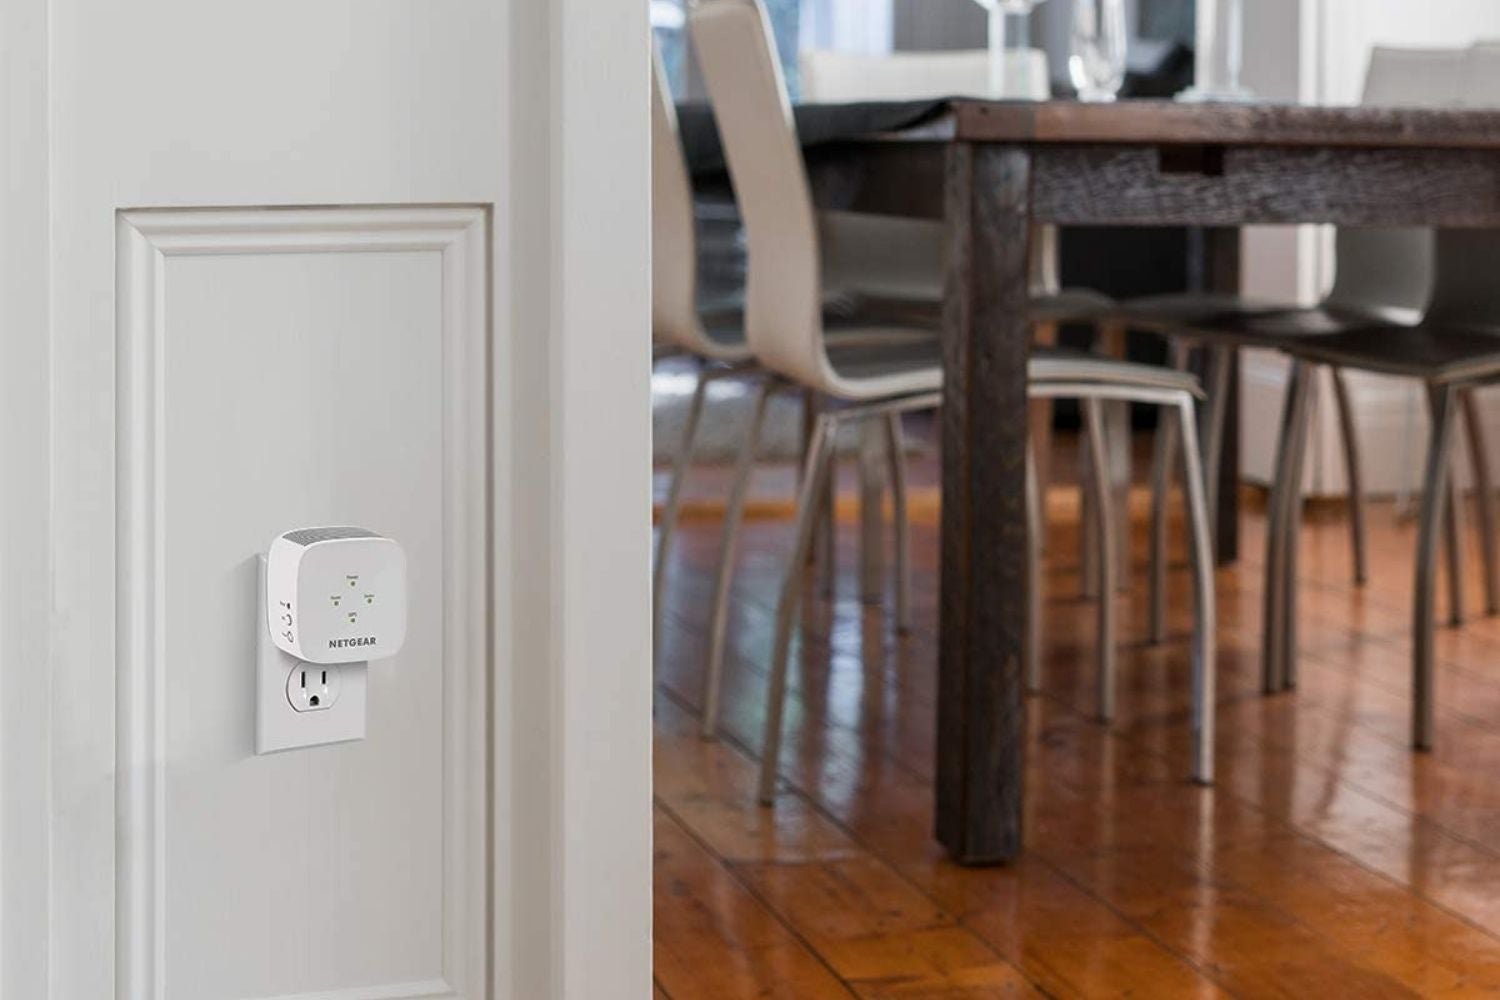 The Best WiFi Extenders for Stronger Connection at Home